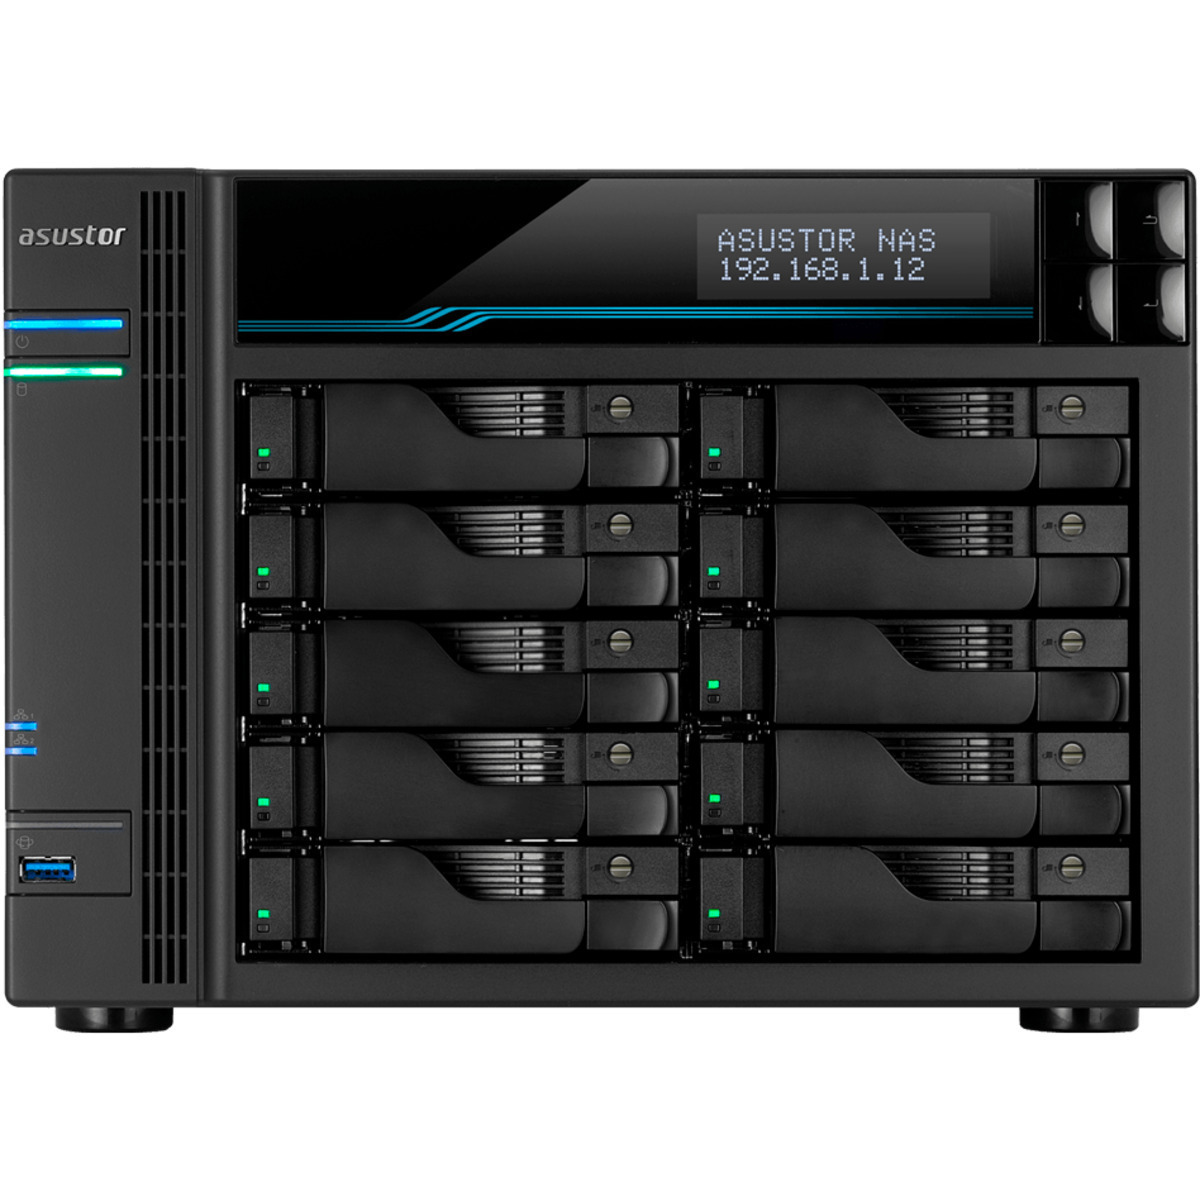 buy ASUSTOR AS7110T Lockerstor 10 Pro 160tb Desktop NAS - Network Attached Storage Device 10x16000gb Western Digital Ultrastar DC HC550 WUH721816ALE6L4 3.5 7200rpm SATA 6Gb/s HDD ENTERPRISE Class Drives Installed - Burn-In Tested - nas headquarters buy network attached storage server device das new raid-5 free shipping simply usa AS7110T Lockerstor 10 Pro